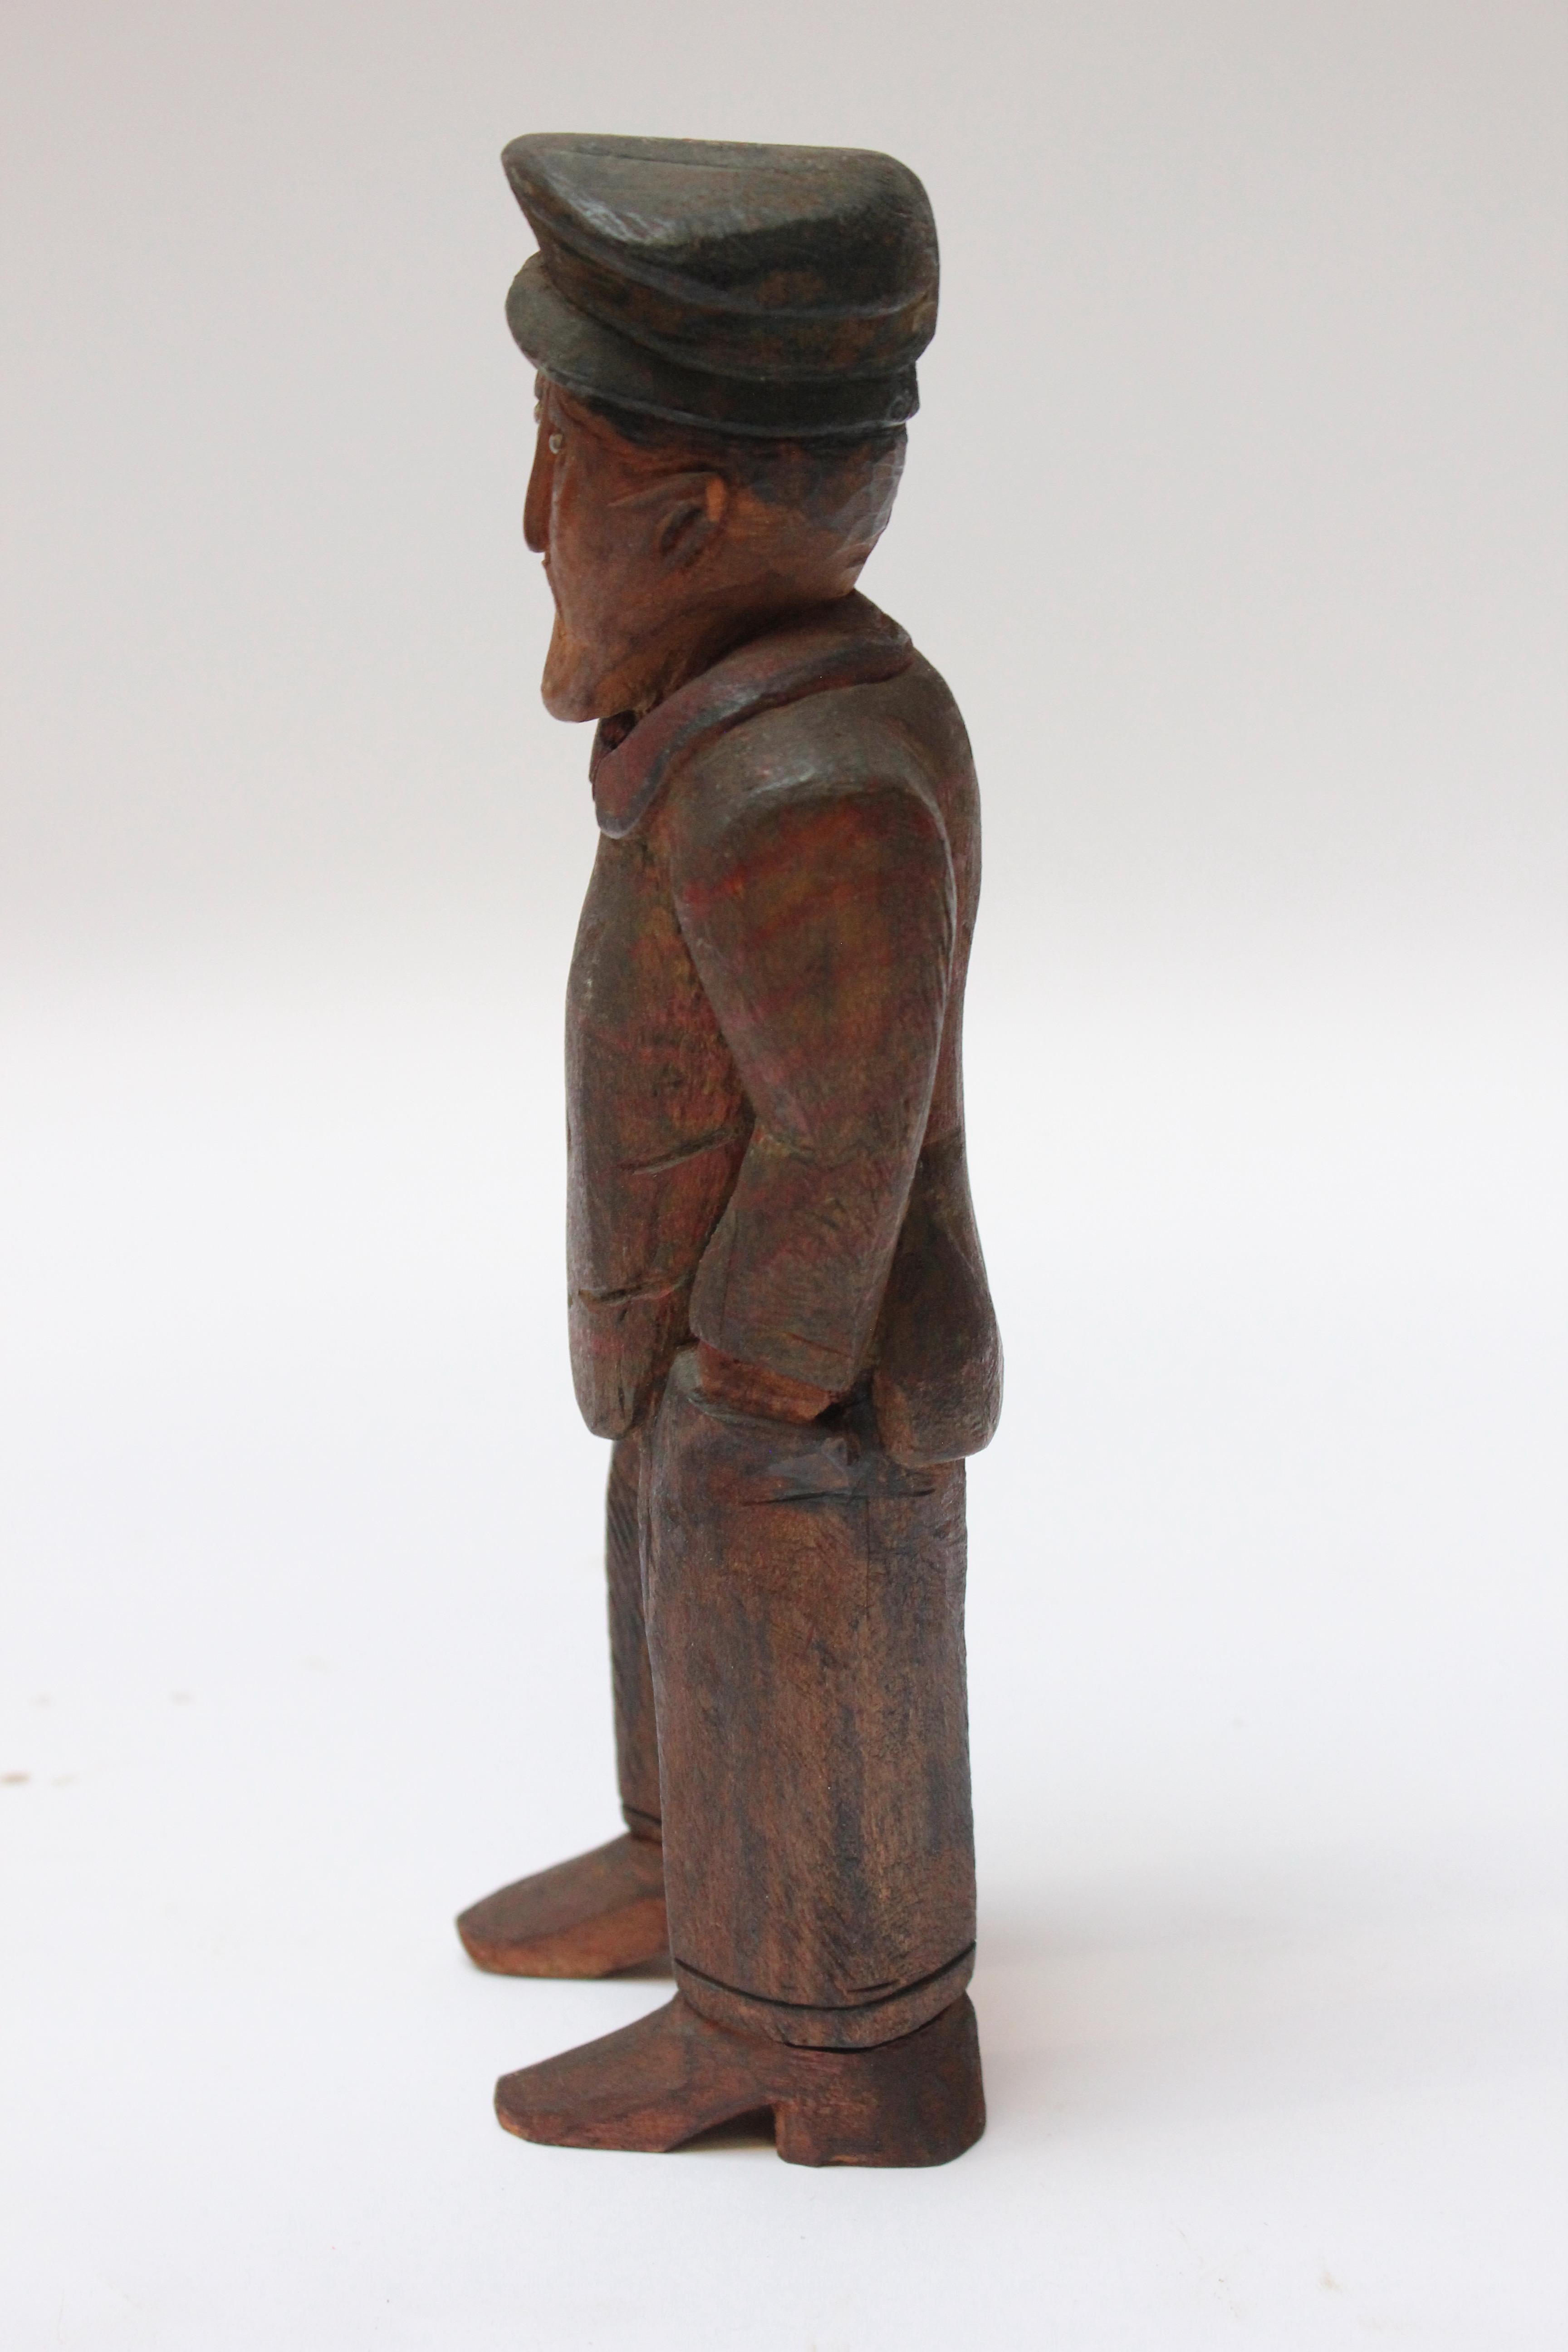 Charming folk art hand-carved and painted figure depicting a man with his hands in his pockets donning what appears to be a newsboy cap (ca. early 20th Century, USA).
Attractive colors employed, which were applied unevenly to the figure, nicely